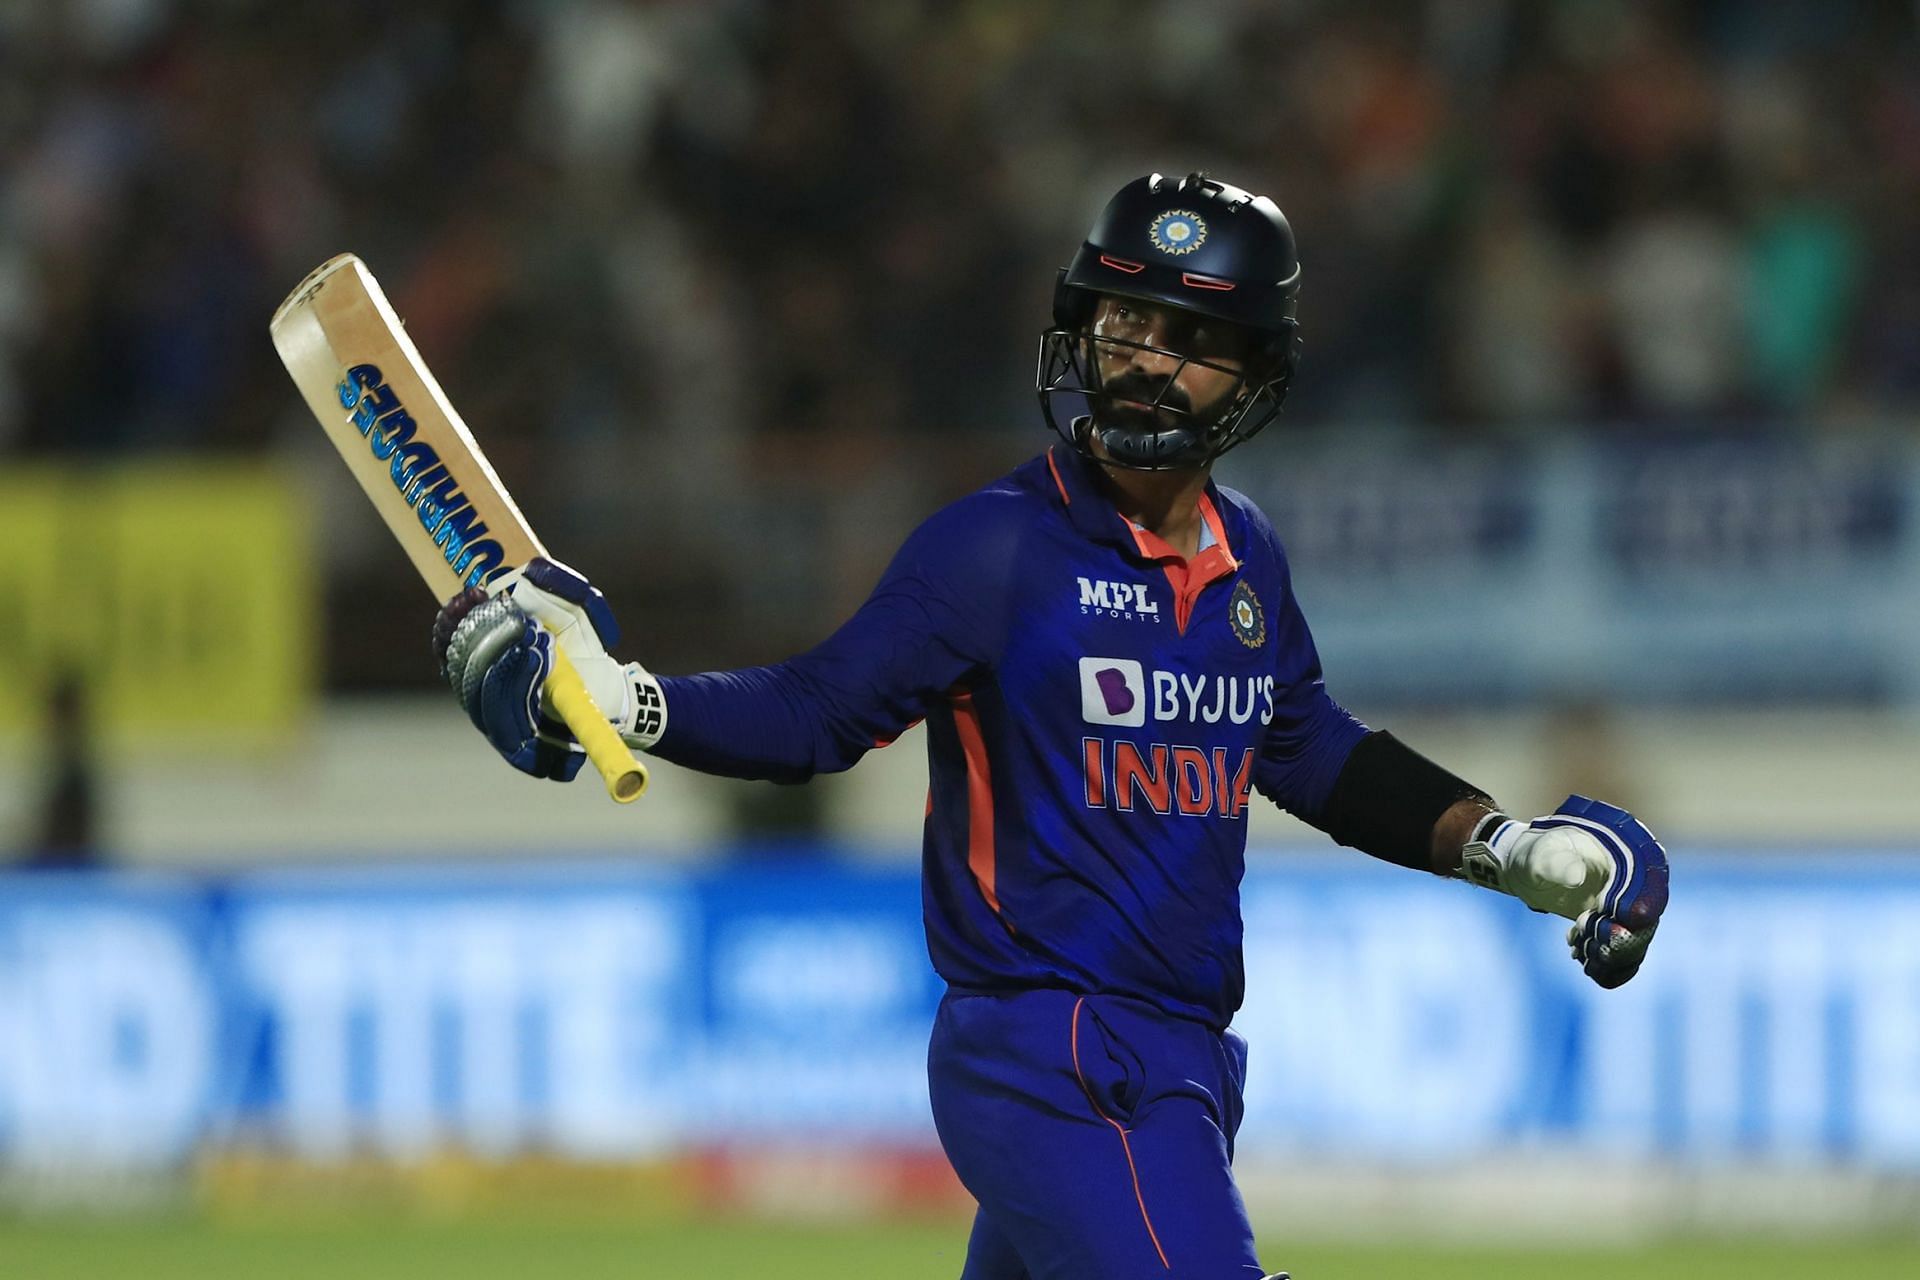 Dinesh Karthik continues to impress as the T20 World Cup edges closer (Image courtesy: Getty Images)